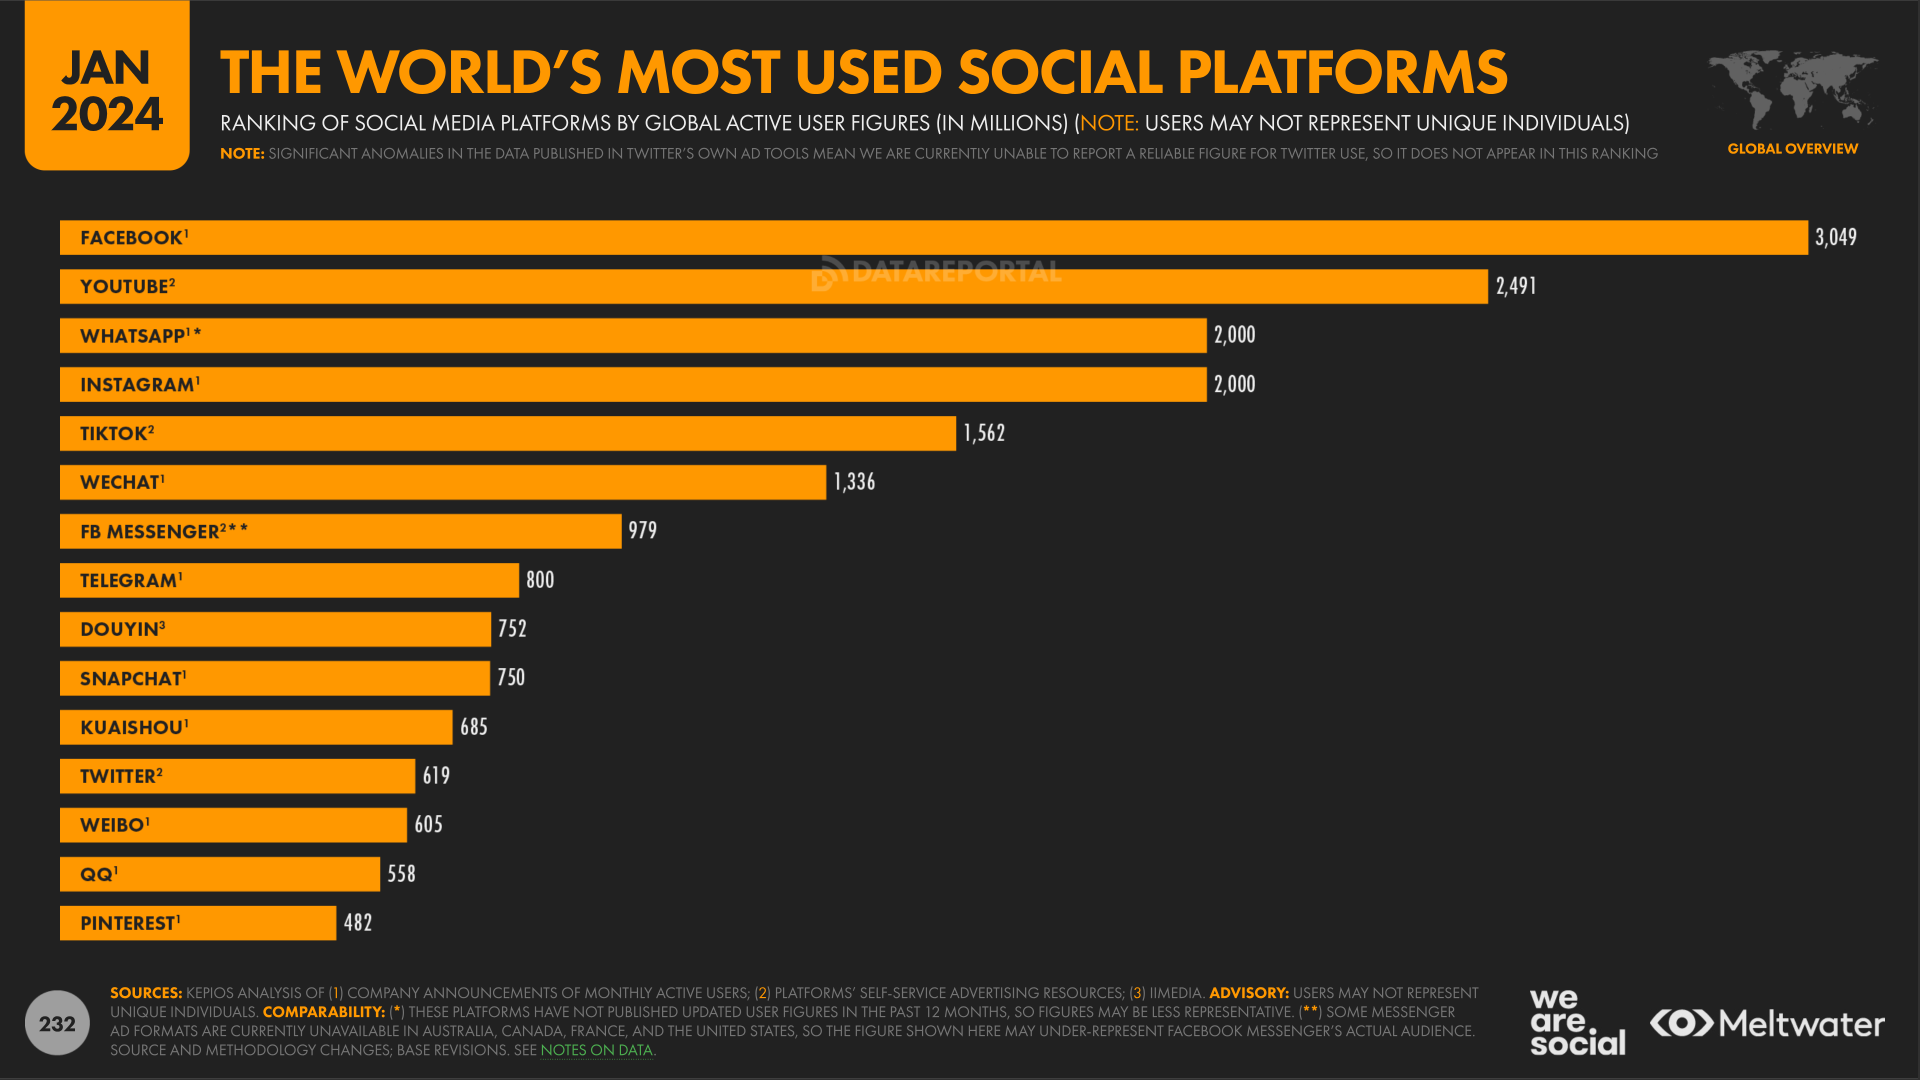 The Wolrd's most used Social platforms